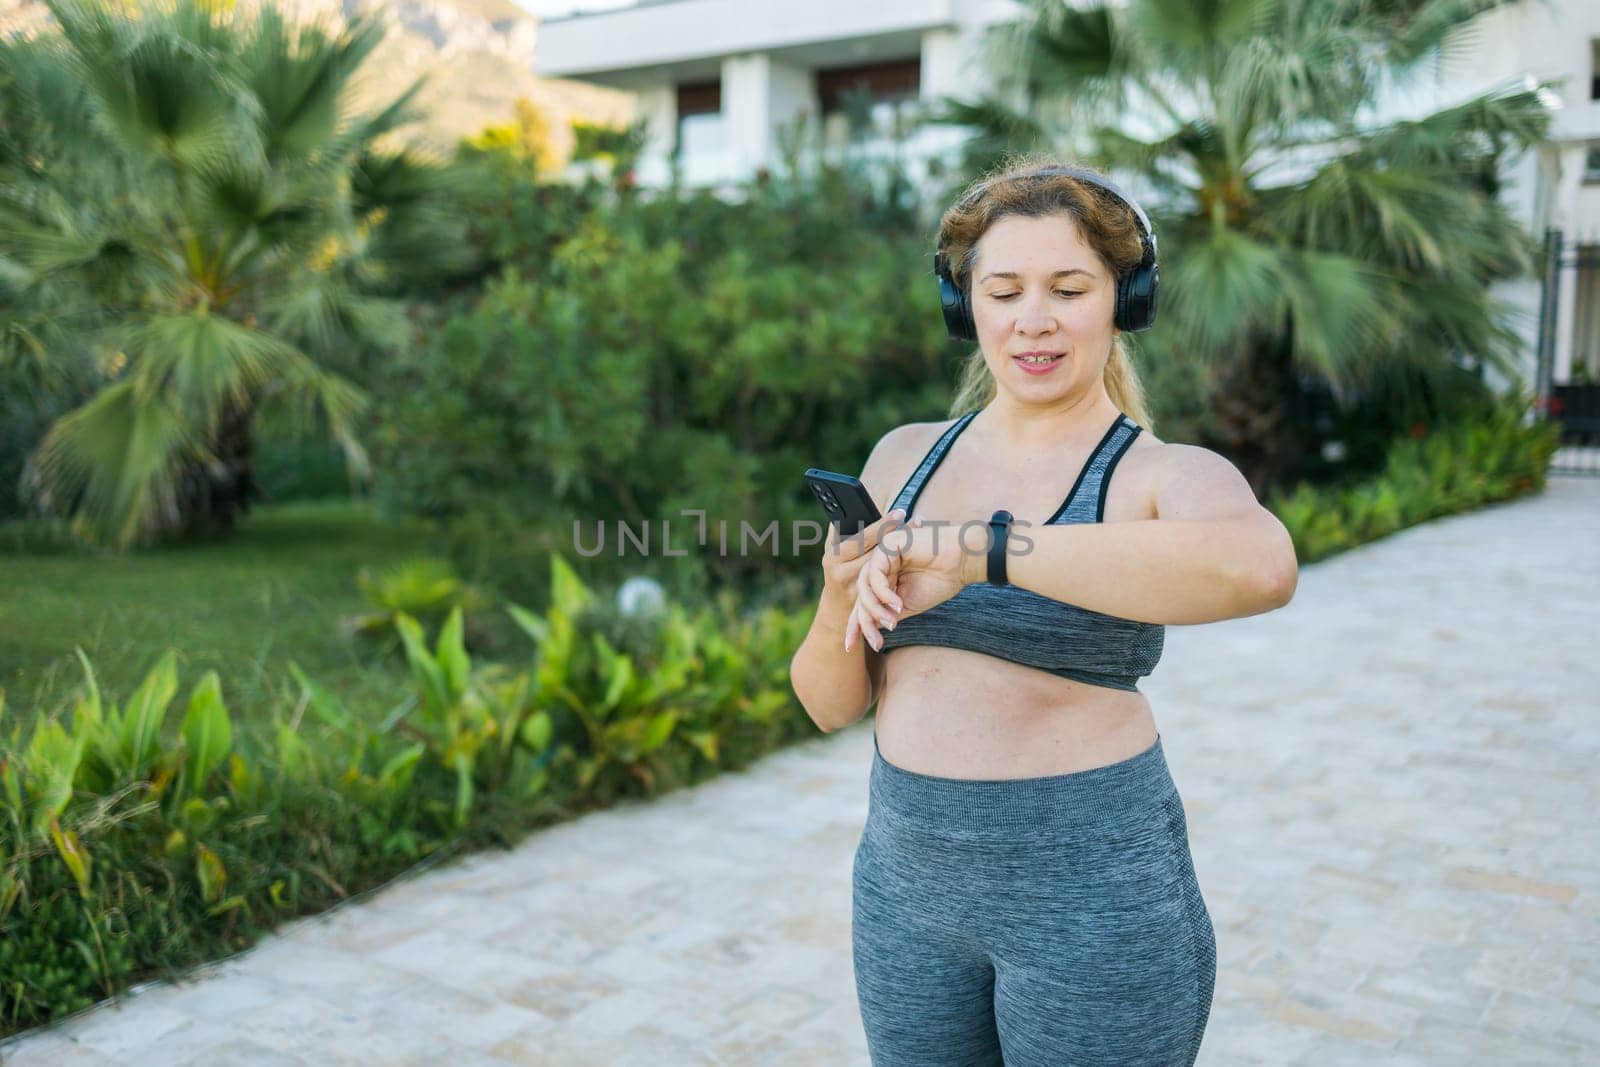 Fat woman checking time or heart rate from smart watch. Exercise or running outdoors for weight loss idea concept. Wellness and wellbeing concept